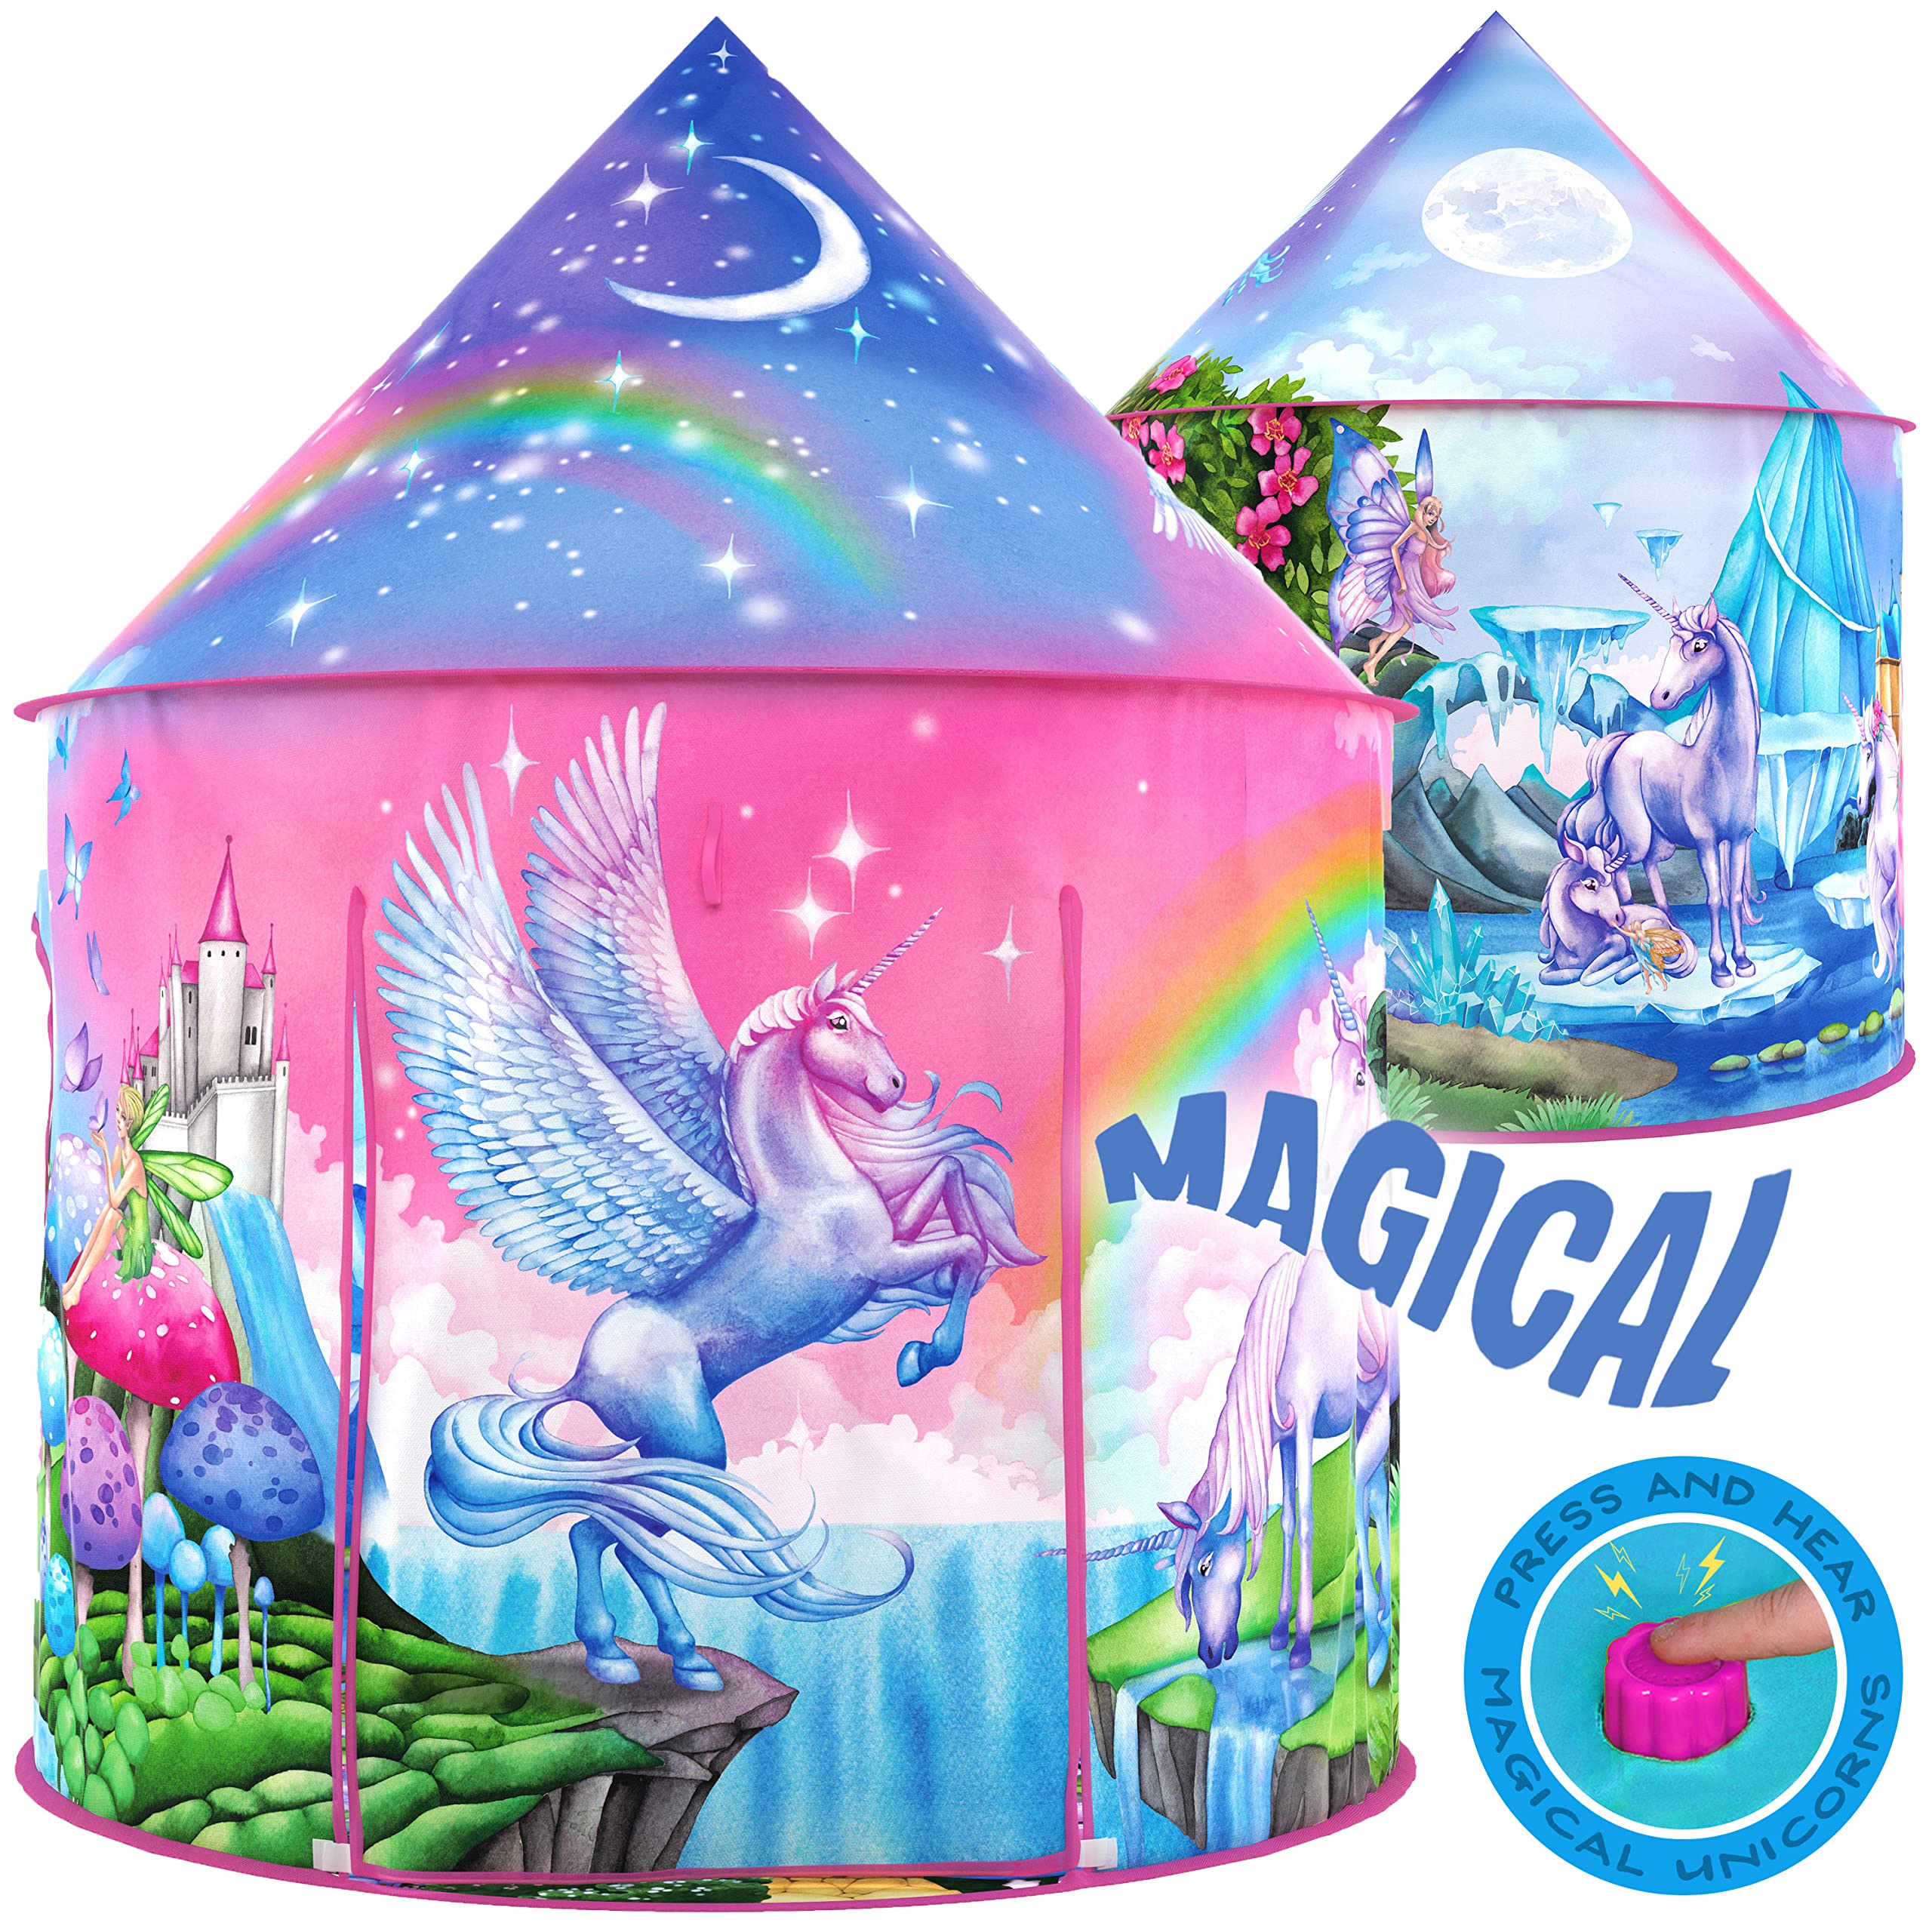 W&O Rainbow Unicorn Tent for Girls with Magical Unicorn Sounds, Unicorn Toys for Girls, Princess Tent for Girls, Unicorns Gifts for Girls, Outdoor & Indoor Tent, Play Tents for Girls